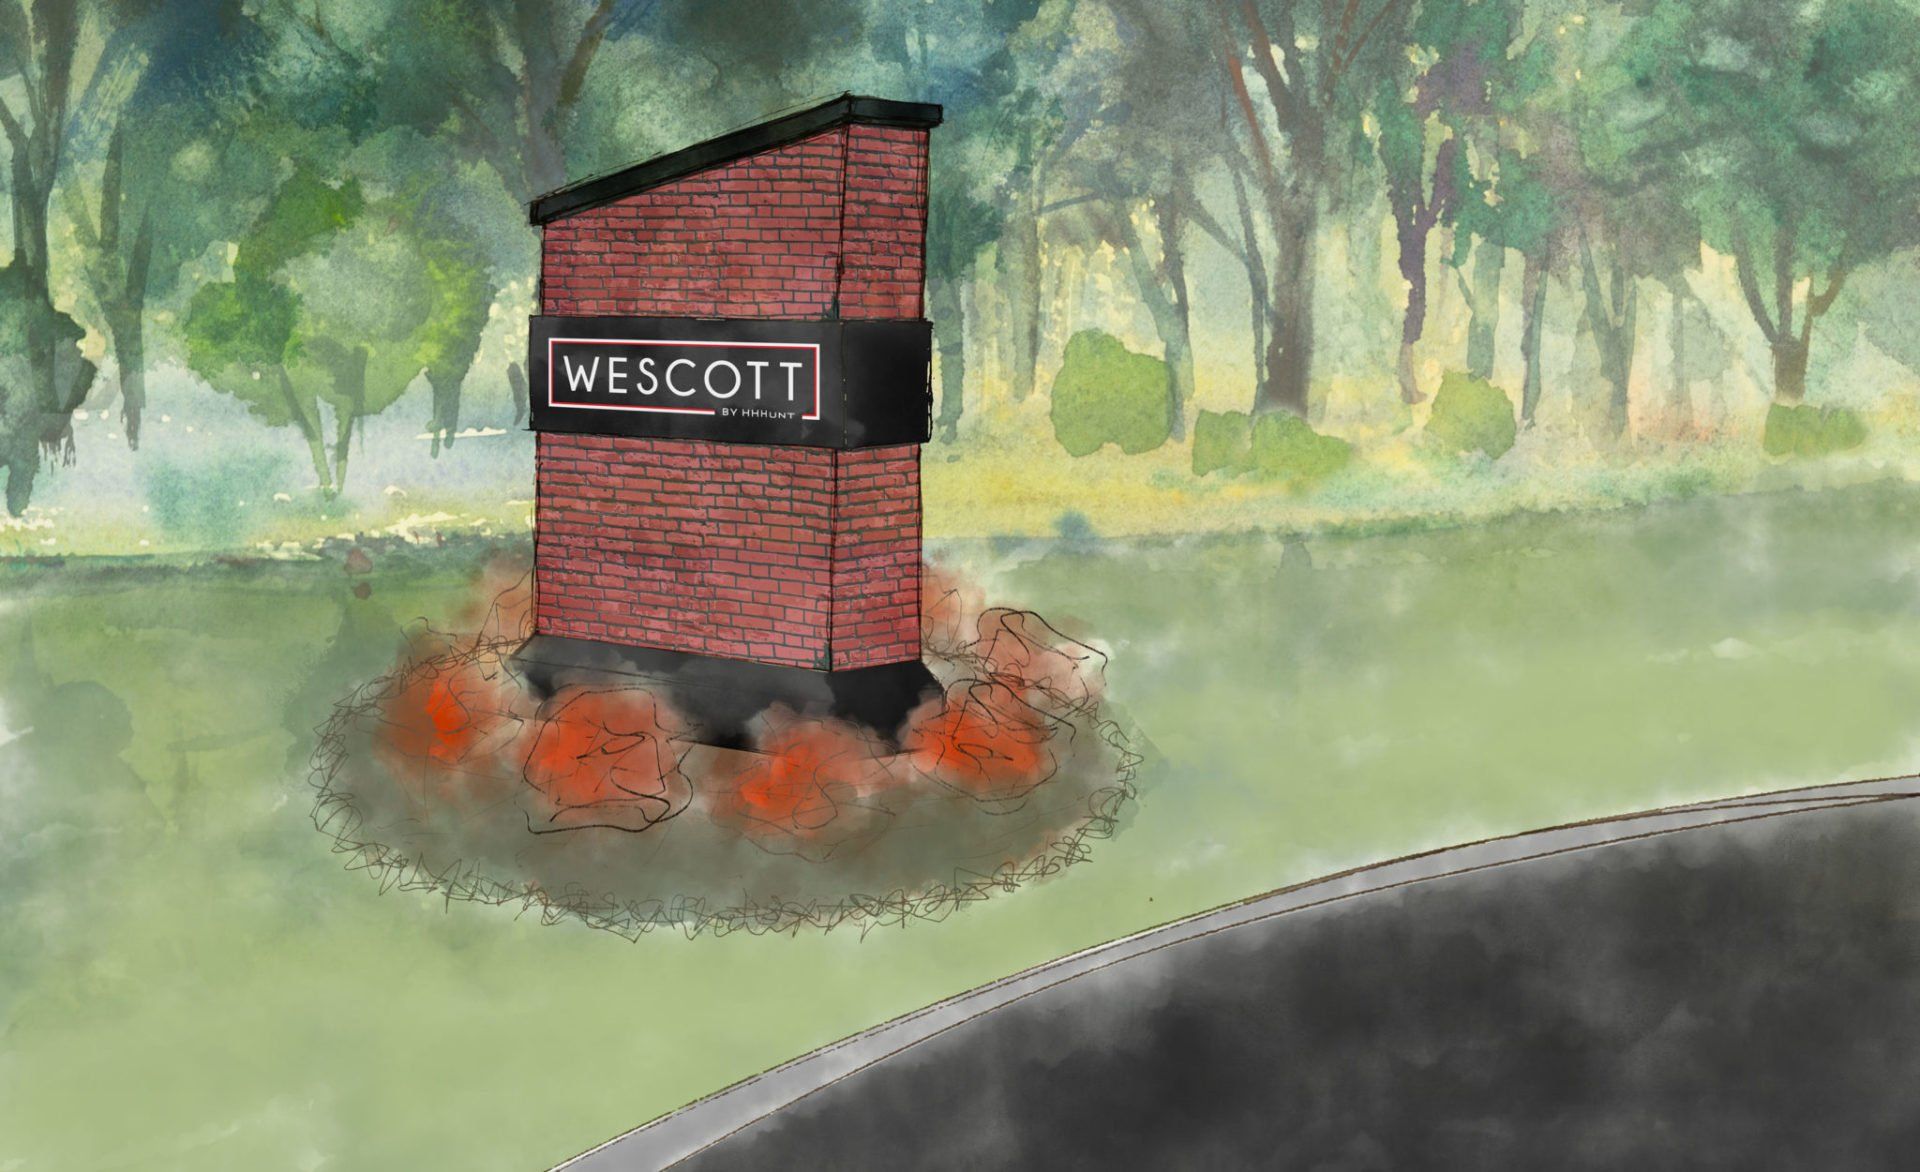 wescott community water color entry way signage daytime